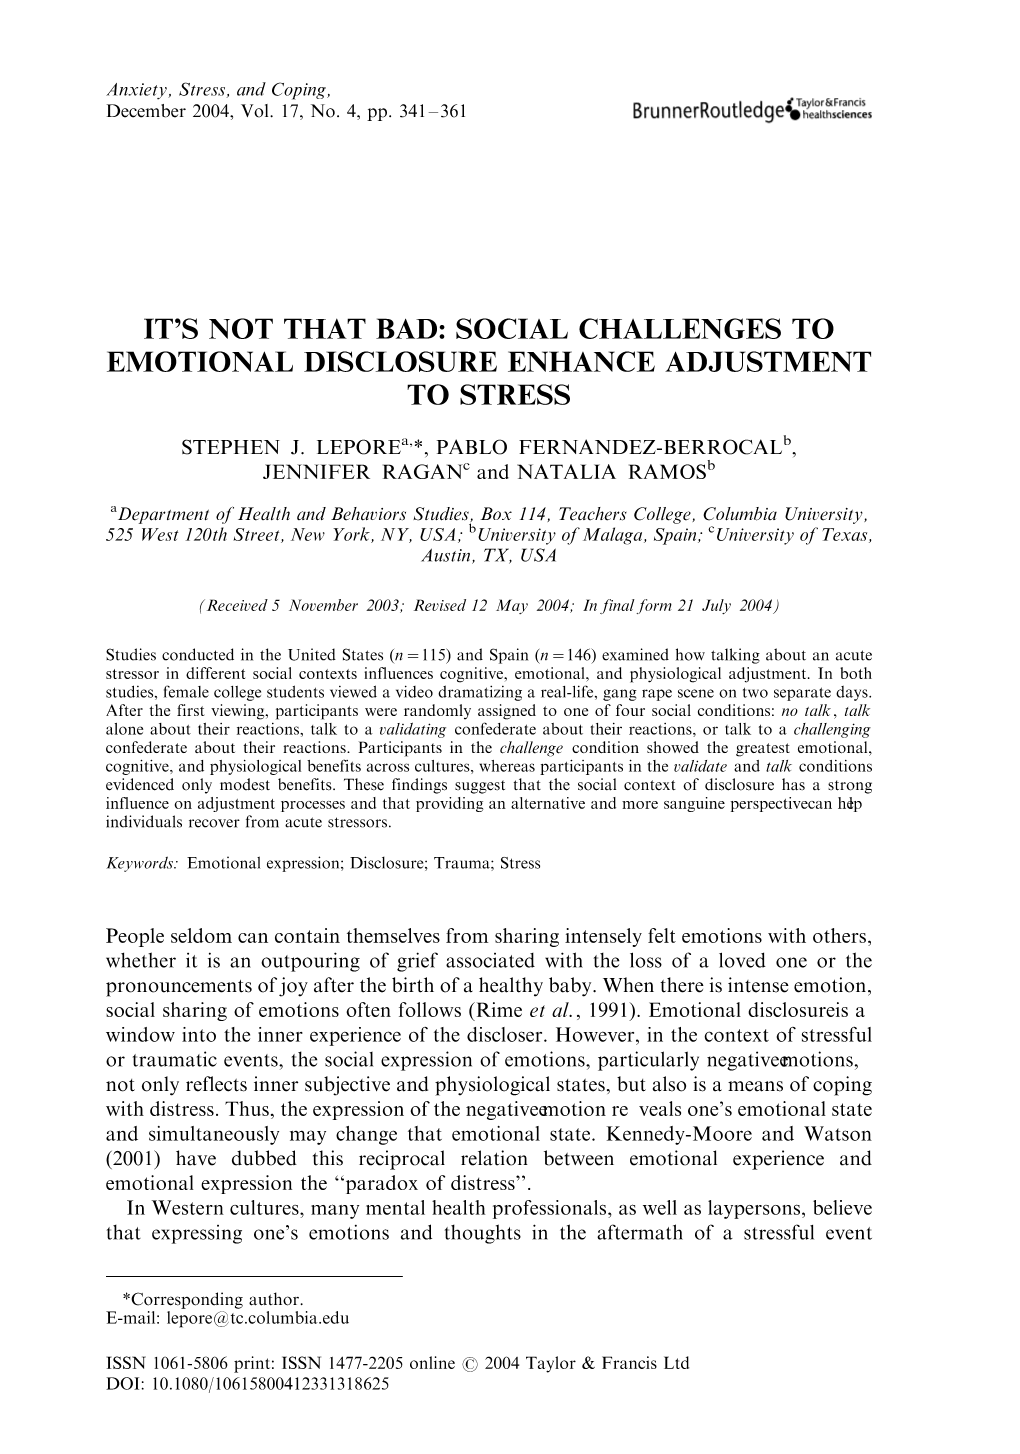 It's Not That Bad: Social Challenges to Emotional